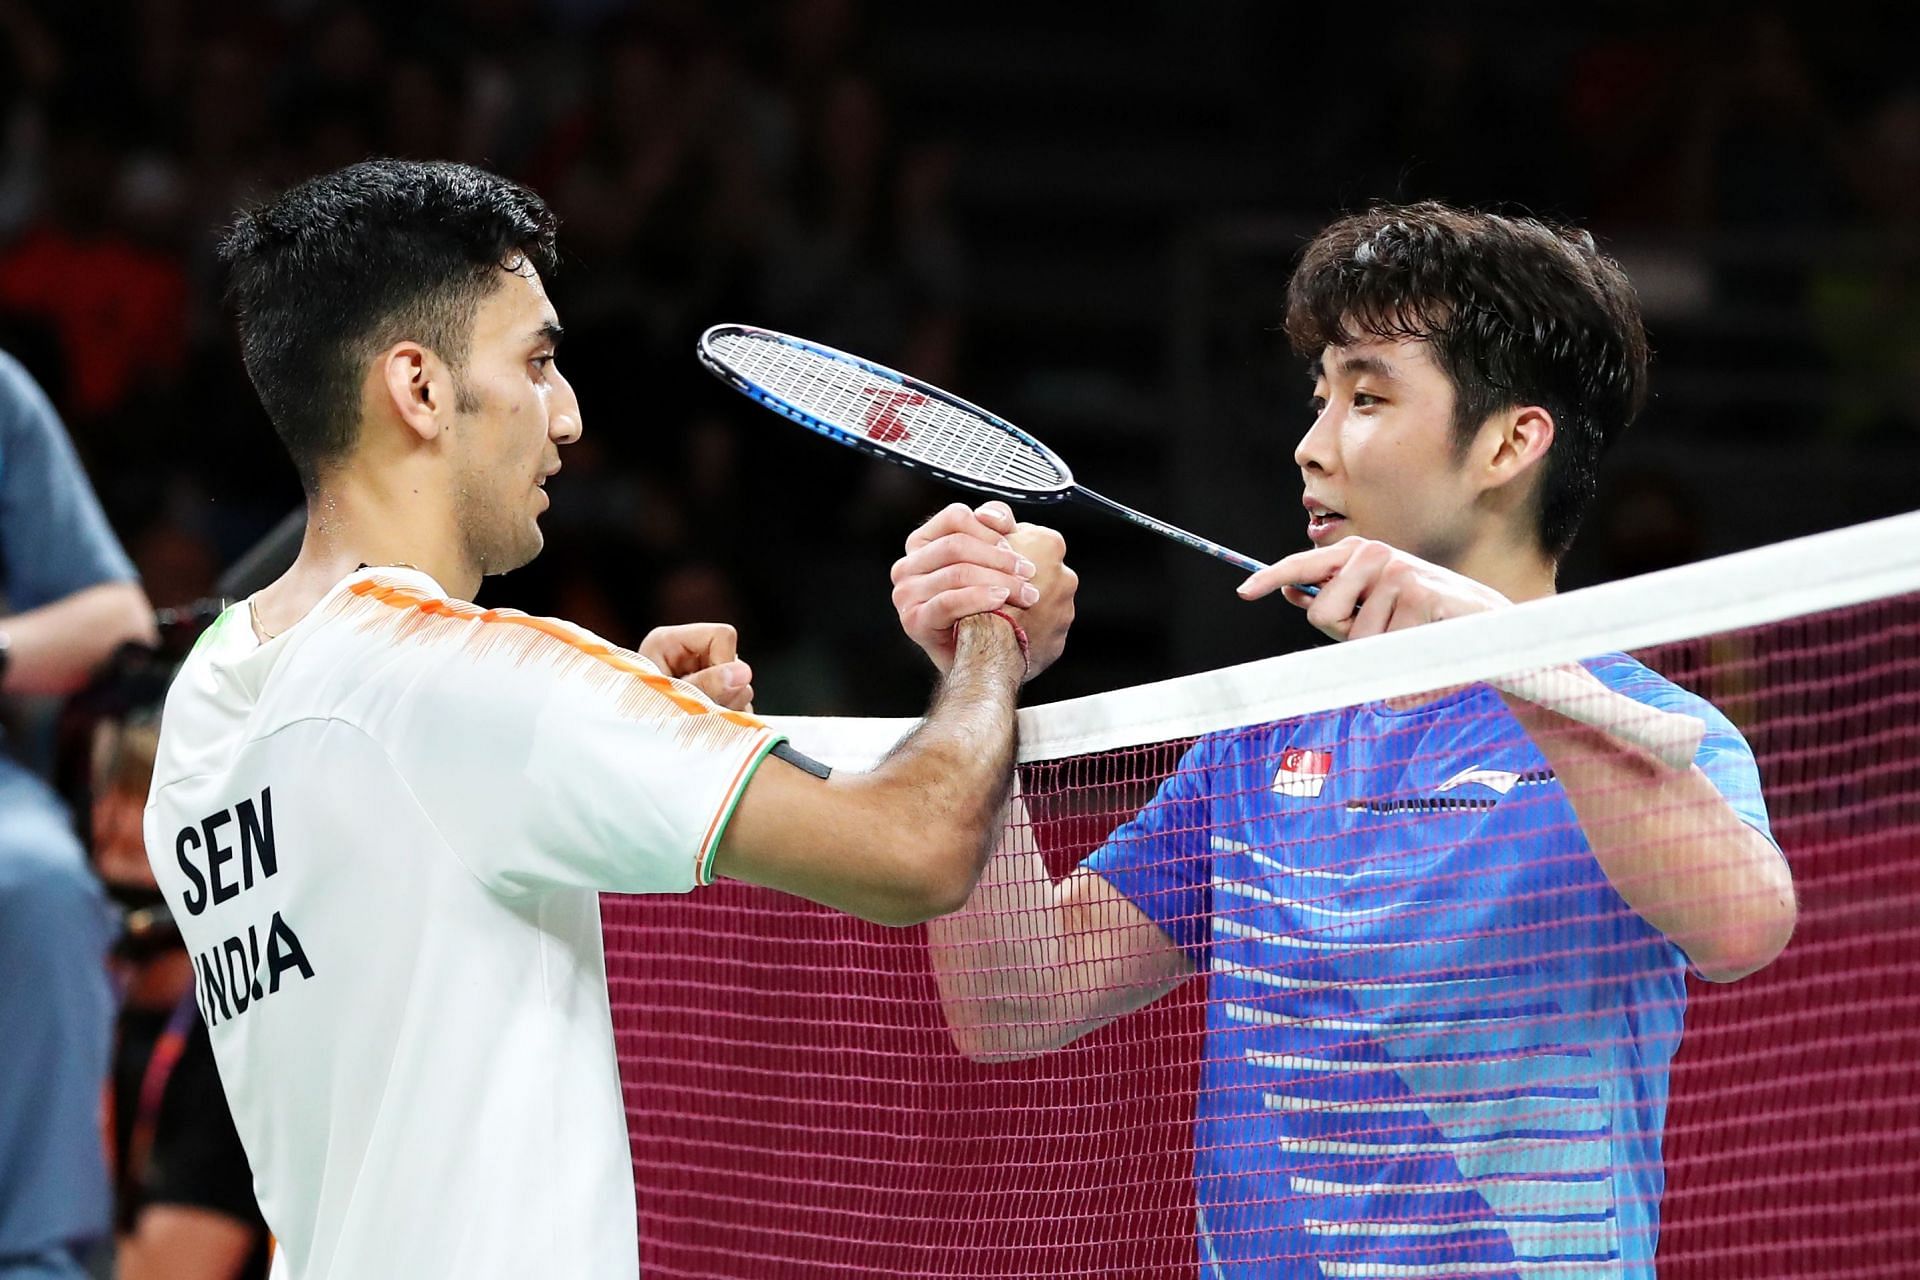 CWG 2022 Lakshya Sen vs Jia Heng Teh mens singles preview, head-to-head, prediction, where to watch and live streaming details